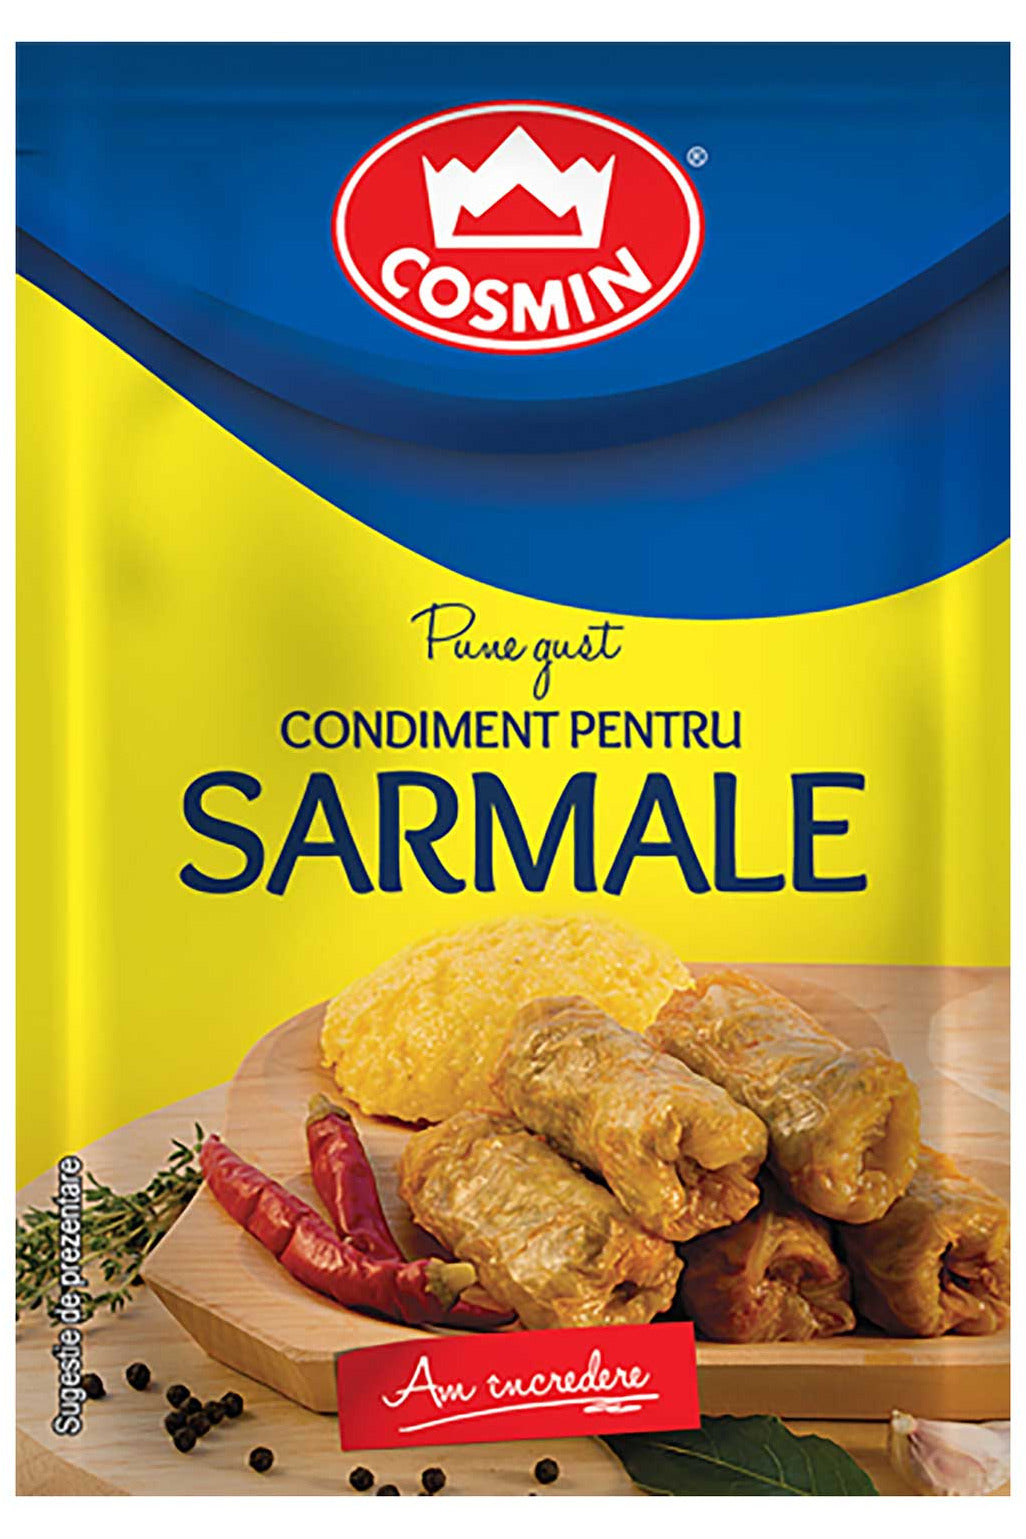 Sarmale - Seasoning Mix for Cabbage Rolls - Cosmin